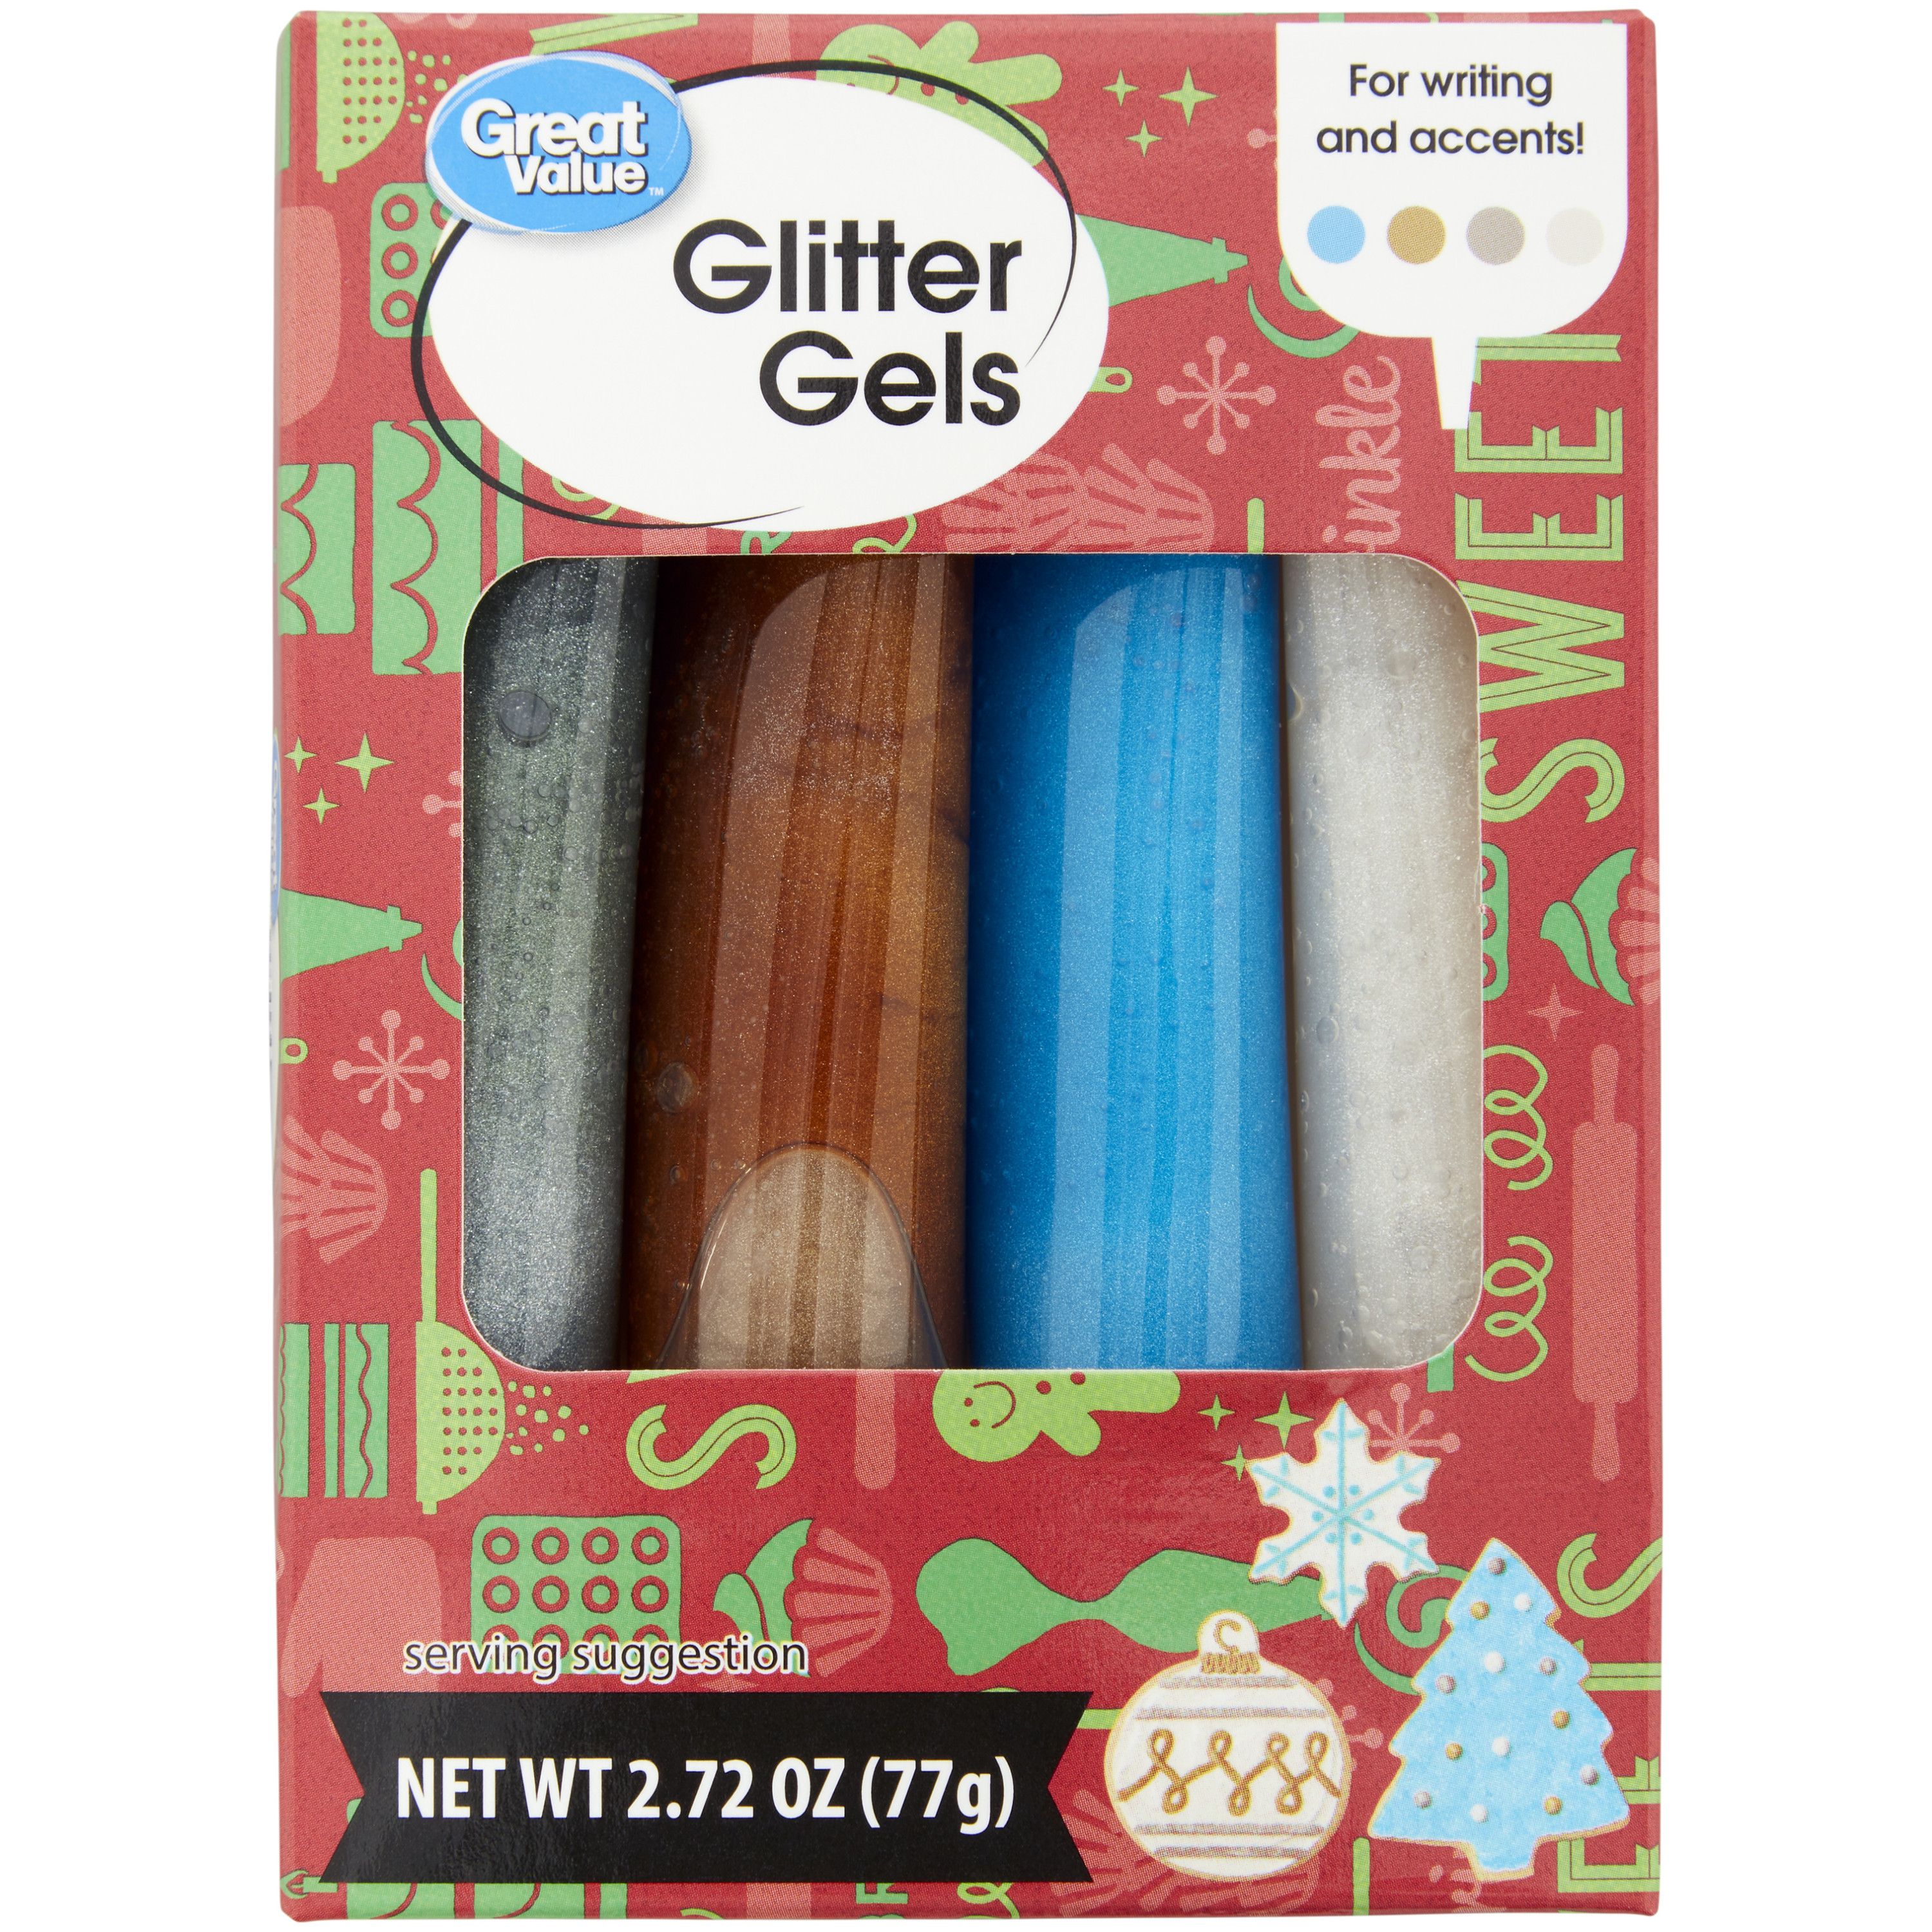 Great Value Silver, Gold, Blue and White Holiday Glitter Gel Frosting Tube Set, 2.72 oz. (4-Count... | Walmart (US)